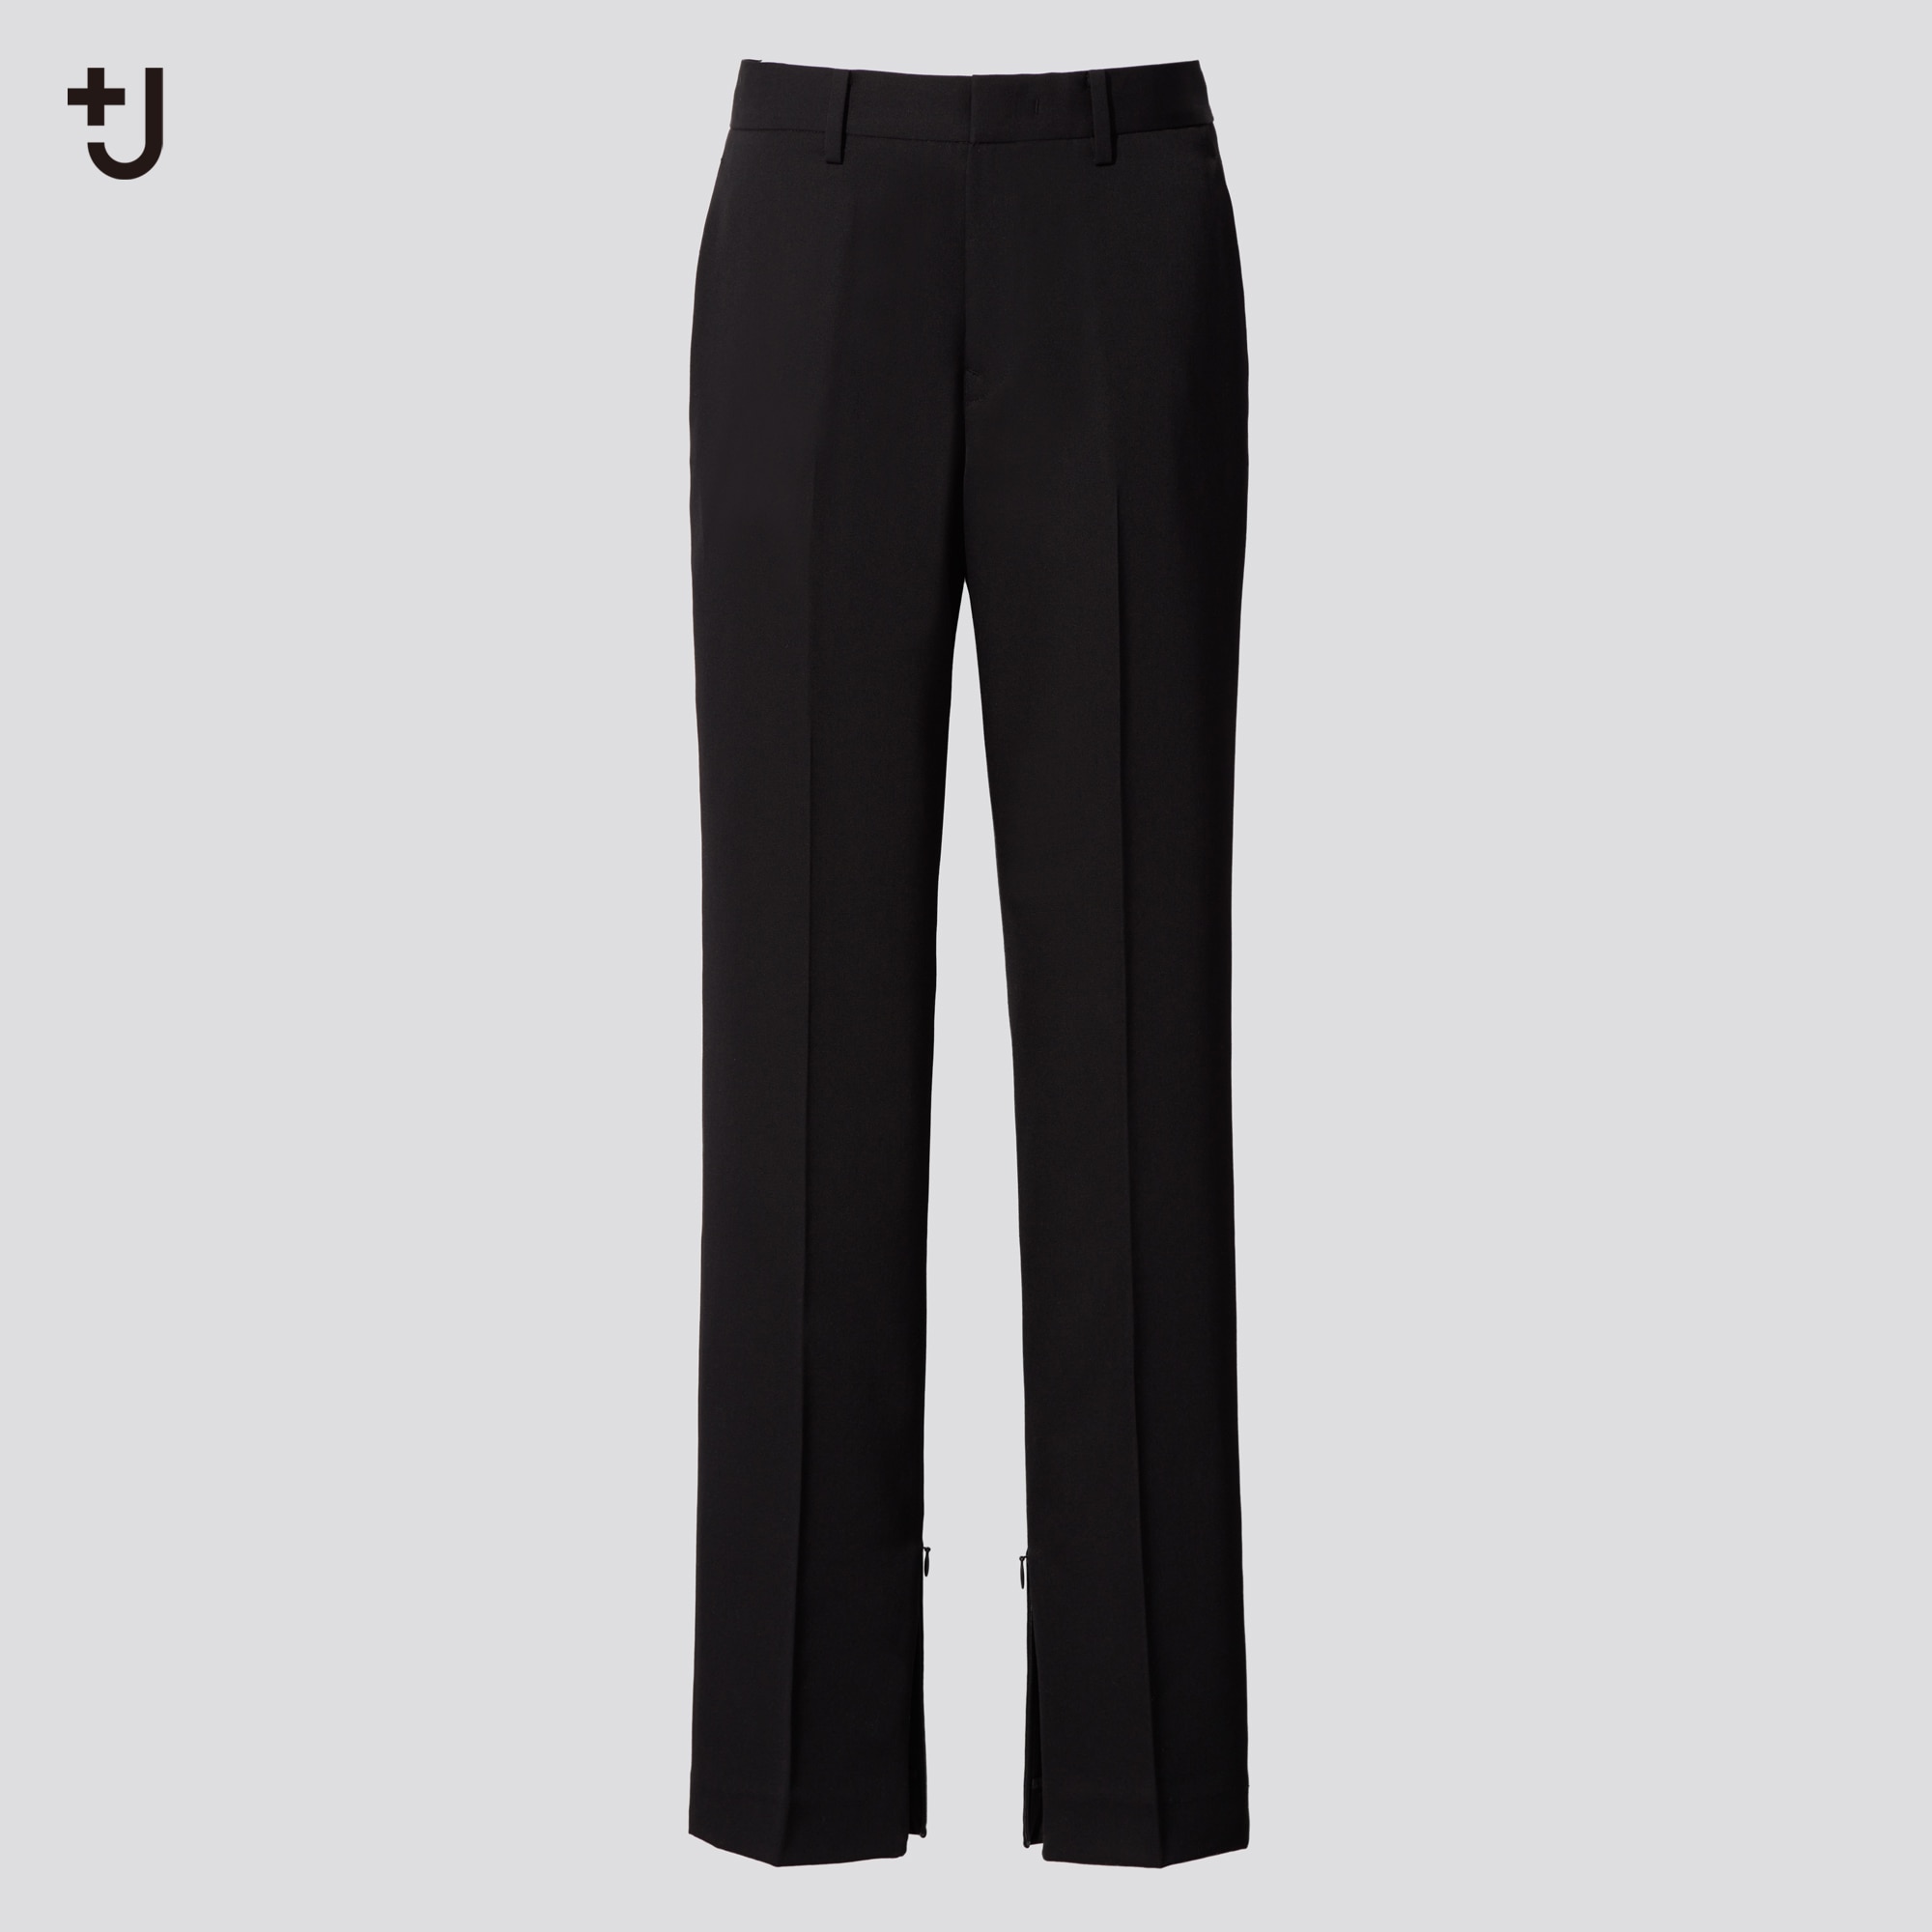 black tapered work trousers